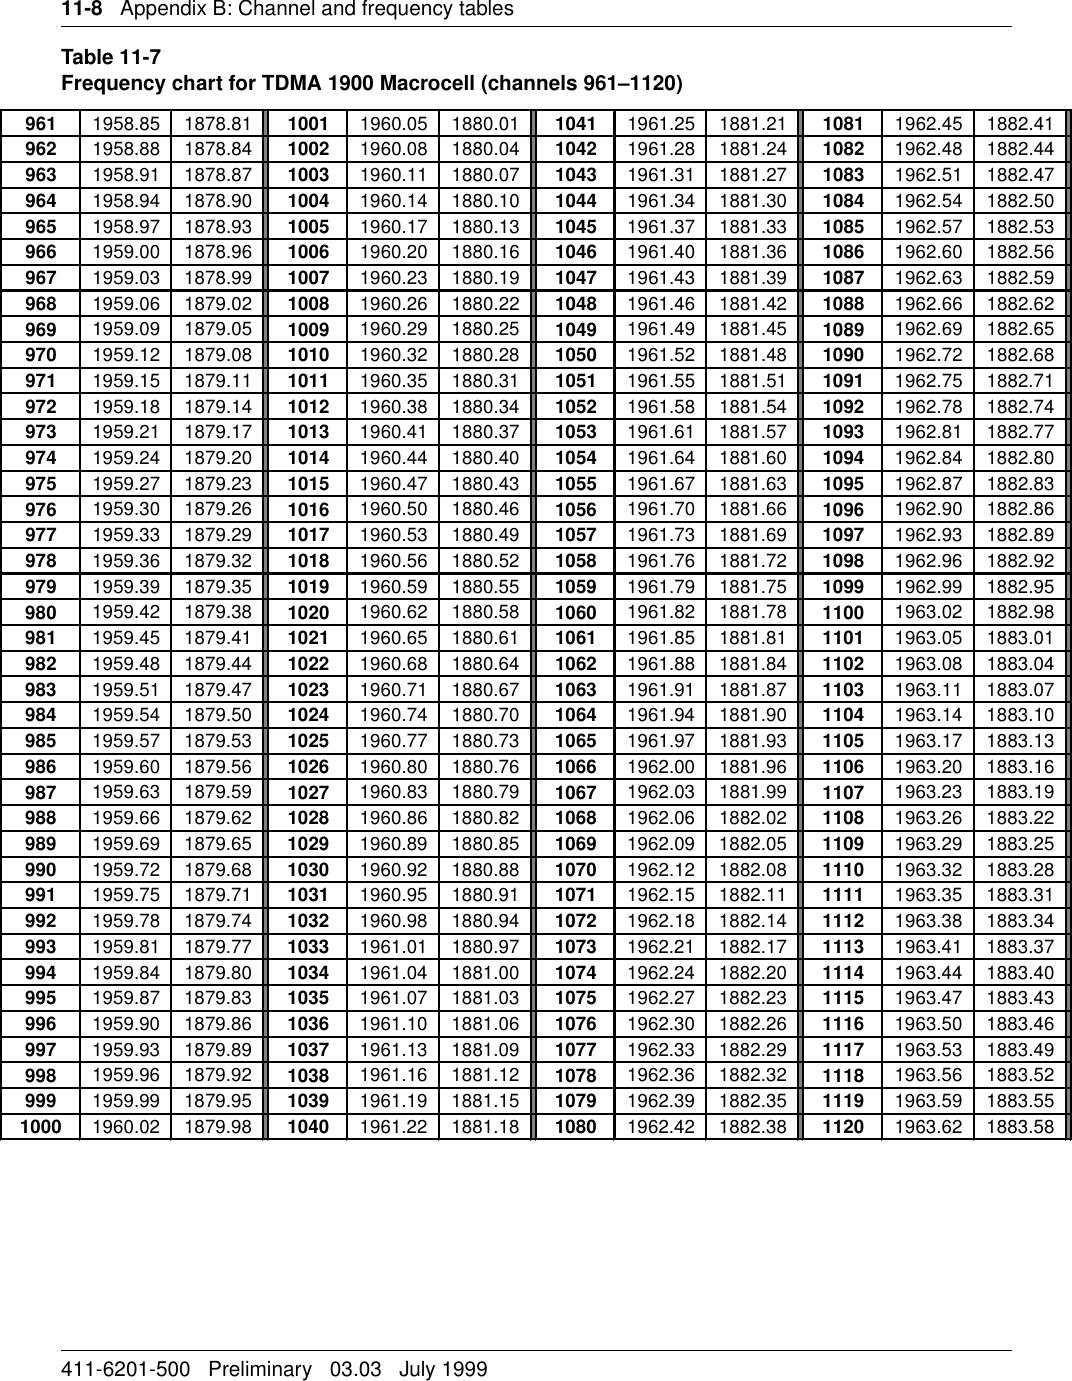 11-8   Appendix B: Channel and frequency tables411-6201-500   Preliminary   03.03   July 1999Table 11-7Frequency chart for TDMA 1900 Macrocell (channels 961–1120)961 1958.85 1878.81 1001 1960.05 1880.01 1041 1961.25 1881.21 1081 1962.45 1882.41962 1958.88 1878.84 1002 1960.08 1880.04 1042 1961.28 1881.24 1082 1962.48 1882.44963 1958.91 1878.87 1003 1960.11 1880.07 1043 1961.31 1881.27 1083 1962.51 1882.47964 1958.94 1878.90 1004 1960.14 1880.10 1044 1961.34 1881.30 1084 1962.54 1882.50965 1958.97 1878.93 1005 1960.17 1880.13 1045 1961.37 1881.33 1085 1962.57 1882.53966 1959.00 1878.96 1006 1960.20 1880.16 1046 1961.40 1881.36 1086 1962.60 1882.56967 1959.03 1878.99 1007 1960.23 1880.19 1047 1961.43 1881.39 1087 1962.63 1882.59968 1959.06 1879.02 1008 1960.26 1880.22 1048 1961.46 1881.42 1088 1962.66 1882.62969 1959.09 1879.05 1009 1960.29 1880.25 1049 1961.49 1881.45 1089 1962.69 1882.65970 1959.12 1879.08 1010 1960.32 1880.28 1050 1961.52 1881.48 1090 1962.72 1882.68971 1959.15 1879.11 1011 1960.35 1880.31 1051 1961.55 1881.51 1091 1962.75 1882.71972 1959.18 1879.14 1012 1960.38 1880.34 1052 1961.58 1881.54 1092 1962.78 1882.74973 1959.21 1879.17 1013 1960.41 1880.37 1053 1961.61 1881.57 1093 1962.81 1882.77974 1959.24 1879.20 1014 1960.44 1880.40 1054 1961.64 1881.60 1094 1962.84 1882.80975 1959.27 1879.23 1015 1960.47 1880.43 1055 1961.67 1881.63 1095 1962.87 1882.83976 1959.30 1879.26 1016 1960.50 1880.46 1056 1961.70 1881.66 1096 1962.90 1882.86977 1959.33 1879.29 1017 1960.53 1880.49 1057 1961.73 1881.69 1097 1962.93 1882.89978 1959.36 1879.32 1018 1960.56 1880.52 1058 1961.76 1881.72 1098 1962.96 1882.92979 1959.39 1879.35 1019 1960.59 1880.55 1059 1961.79 1881.75 1099 1962.99 1882.95980 1959.42 1879.38 1020 1960.62 1880.58 1060 1961.82 1881.78 1100 1963.02 1882.98981 1959.45 1879.41 1021 1960.65 1880.61 1061 1961.85 1881.81 1101 1963.05 1883.01982 1959.48 1879.44 1022 1960.68 1880.64 1062 1961.88 1881.84 1102 1963.08 1883.04983 1959.51 1879.47 1023 1960.71 1880.67 1063 1961.91 1881.87 1103 1963.11 1883.07984 1959.54 1879.50 1024 1960.74 1880.70 1064 1961.94 1881.90 1104 1963.14 1883.10985 1959.57 1879.53 1025 1960.77 1880.73 1065 1961.97 1881.93 1105 1963.17 1883.13986 1959.60 1879.56 1026 1960.80 1880.76 1066 1962.00 1881.96 1106 1963.20 1883.16987 1959.63 1879.59 1027 1960.83 1880.79 1067 1962.03 1881.99 1107 1963.23 1883.19988 1959.66 1879.62 1028 1960.86 1880.82 1068 1962.06 1882.02 1108 1963.26 1883.22989 1959.69 1879.65 1029 1960.89 1880.85 1069 1962.09 1882.05 1109 1963.29 1883.25990 1959.72 1879.68 1030 1960.92 1880.88 1070 1962.12 1882.08 1110 1963.32 1883.28991 1959.75 1879.71 1031 1960.95 1880.91 1071 1962.15 1882.11 1111 1963.35 1883.31992 1959.78 1879.74 1032 1960.98 1880.94 1072 1962.18 1882.14 1112 1963.38 1883.34993 1959.81 1879.77 1033 1961.01 1880.97 1073 1962.21 1882.17 1113 1963.41 1883.37994 1959.84 1879.80 1034 1961.04 1881.00 1074 1962.24 1882.20 1114 1963.44 1883.40995 1959.87 1879.83 1035 1961.07 1881.03 1075 1962.27 1882.23 1115 1963.47 1883.43996 1959.90 1879.86 1036 1961.10 1881.06 1076 1962.30 1882.26 1116 1963.50 1883.46997 1959.93 1879.89 1037 1961.13 1881.09 1077 1962.33 1882.29 1117 1963.53 1883.49998 1959.96 1879.92 1038 1961.16 1881.12 1078 1962.36 1882.32 1118 1963.56 1883.52999 1959.99 1879.95 1039 1961.19 1881.15 1079 1962.39 1882.35 1119 1963.59 1883.551000 1960.02 1879.98 1040 1961.22 1881.18 1080 1962.42 1882.38 1120 1963.62 1883.58